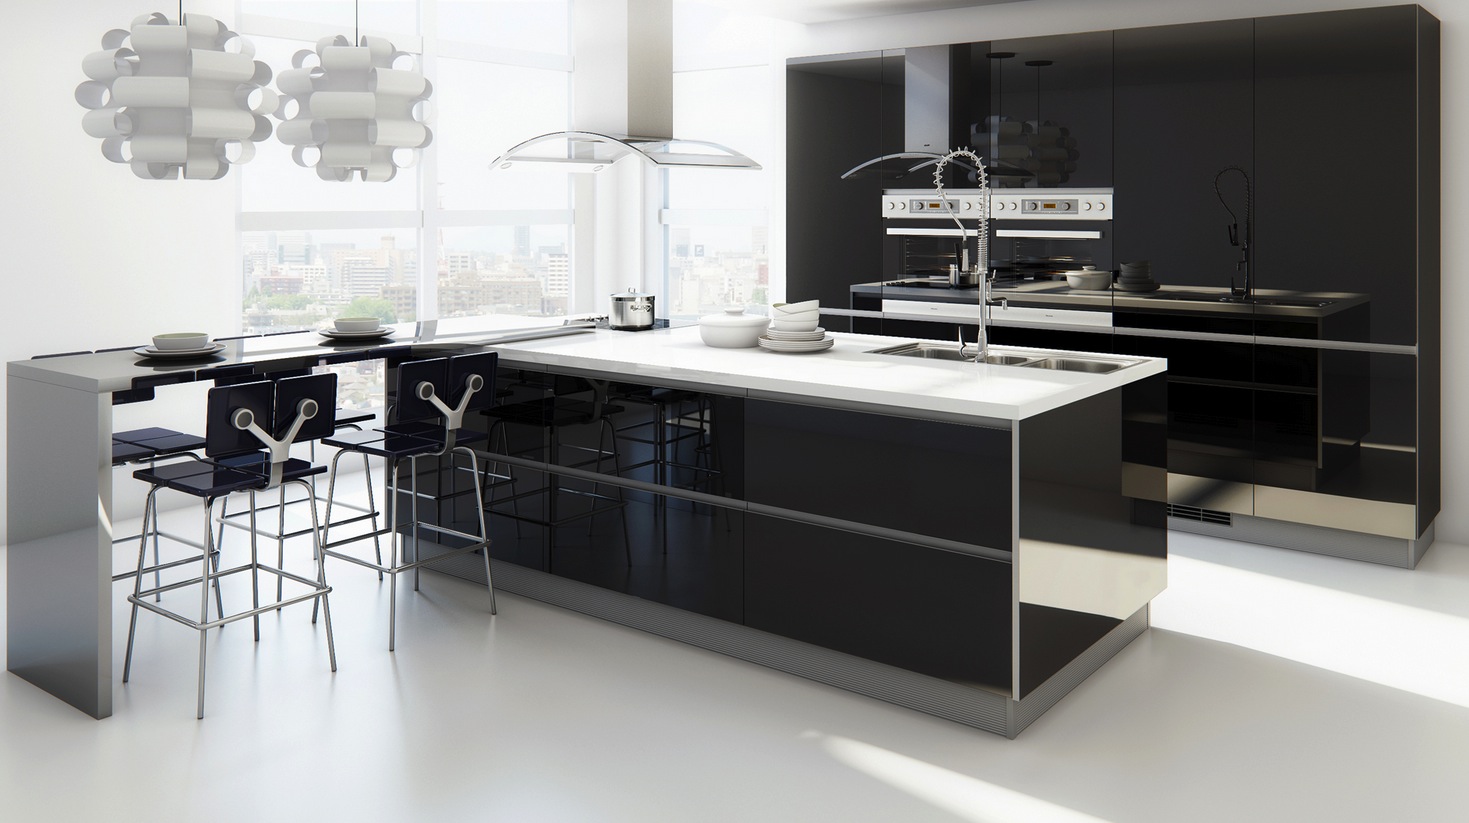 With Convertible Design Island With Convertible Breakfast Bar Design Also Modern Kitchen Sink Picture Feat Cool Pendant Lighting Idea Kitchen 20 Elegant And Beautiful Kitchens With Black And White Curtains